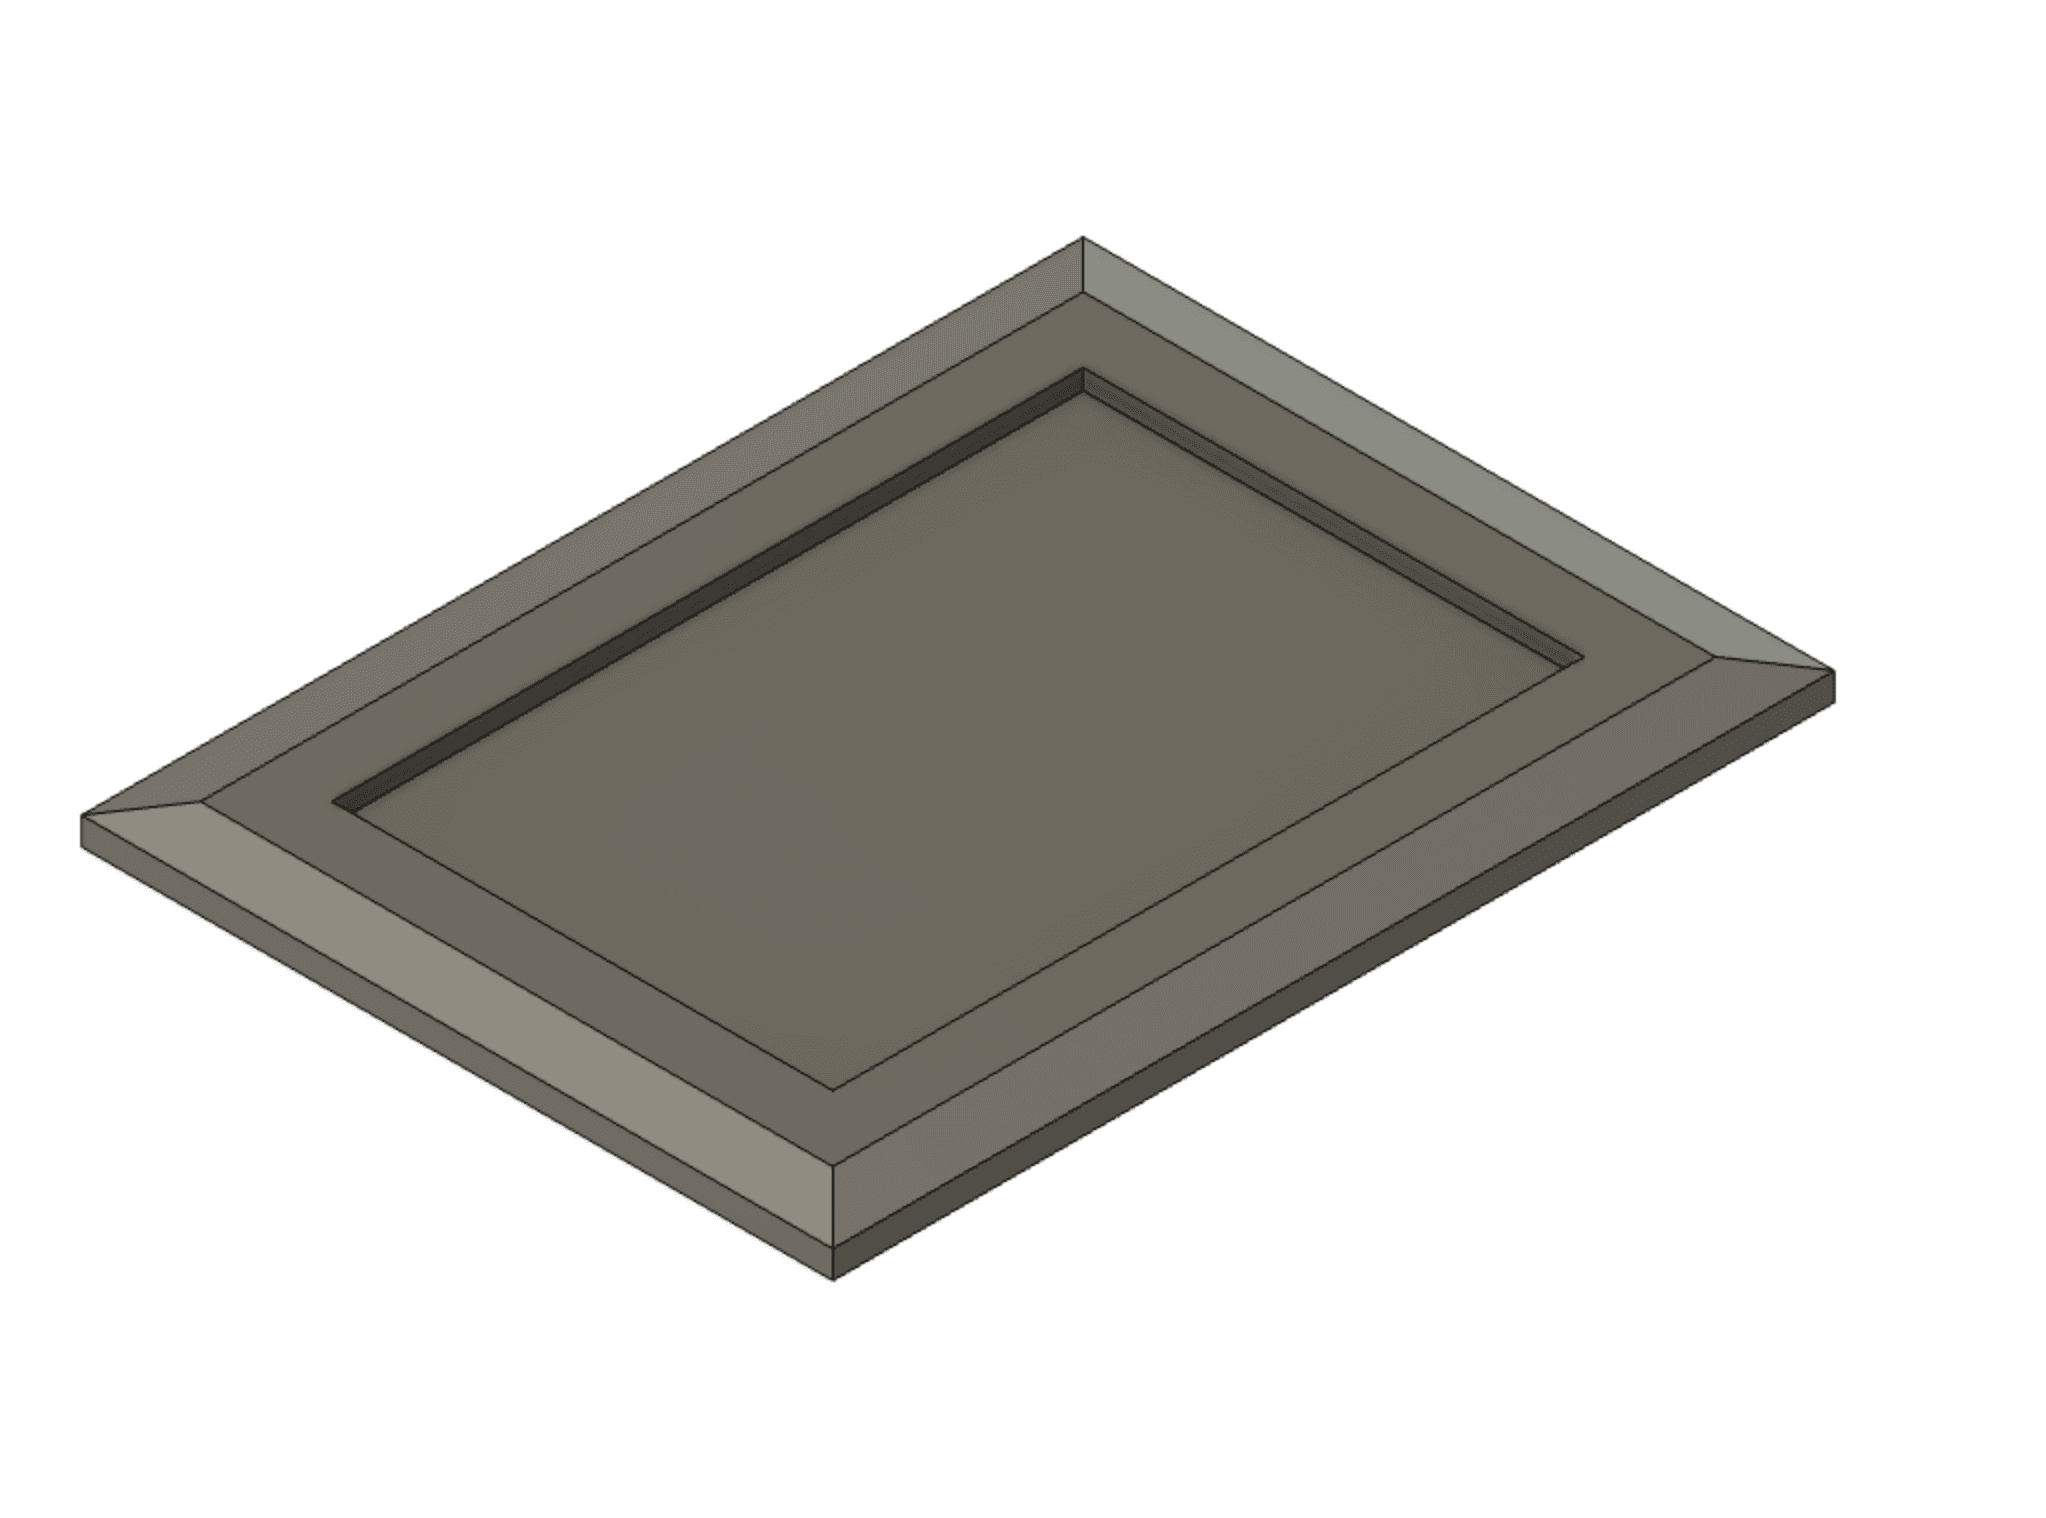 5x7 Picture Frame Template.stl 3d model